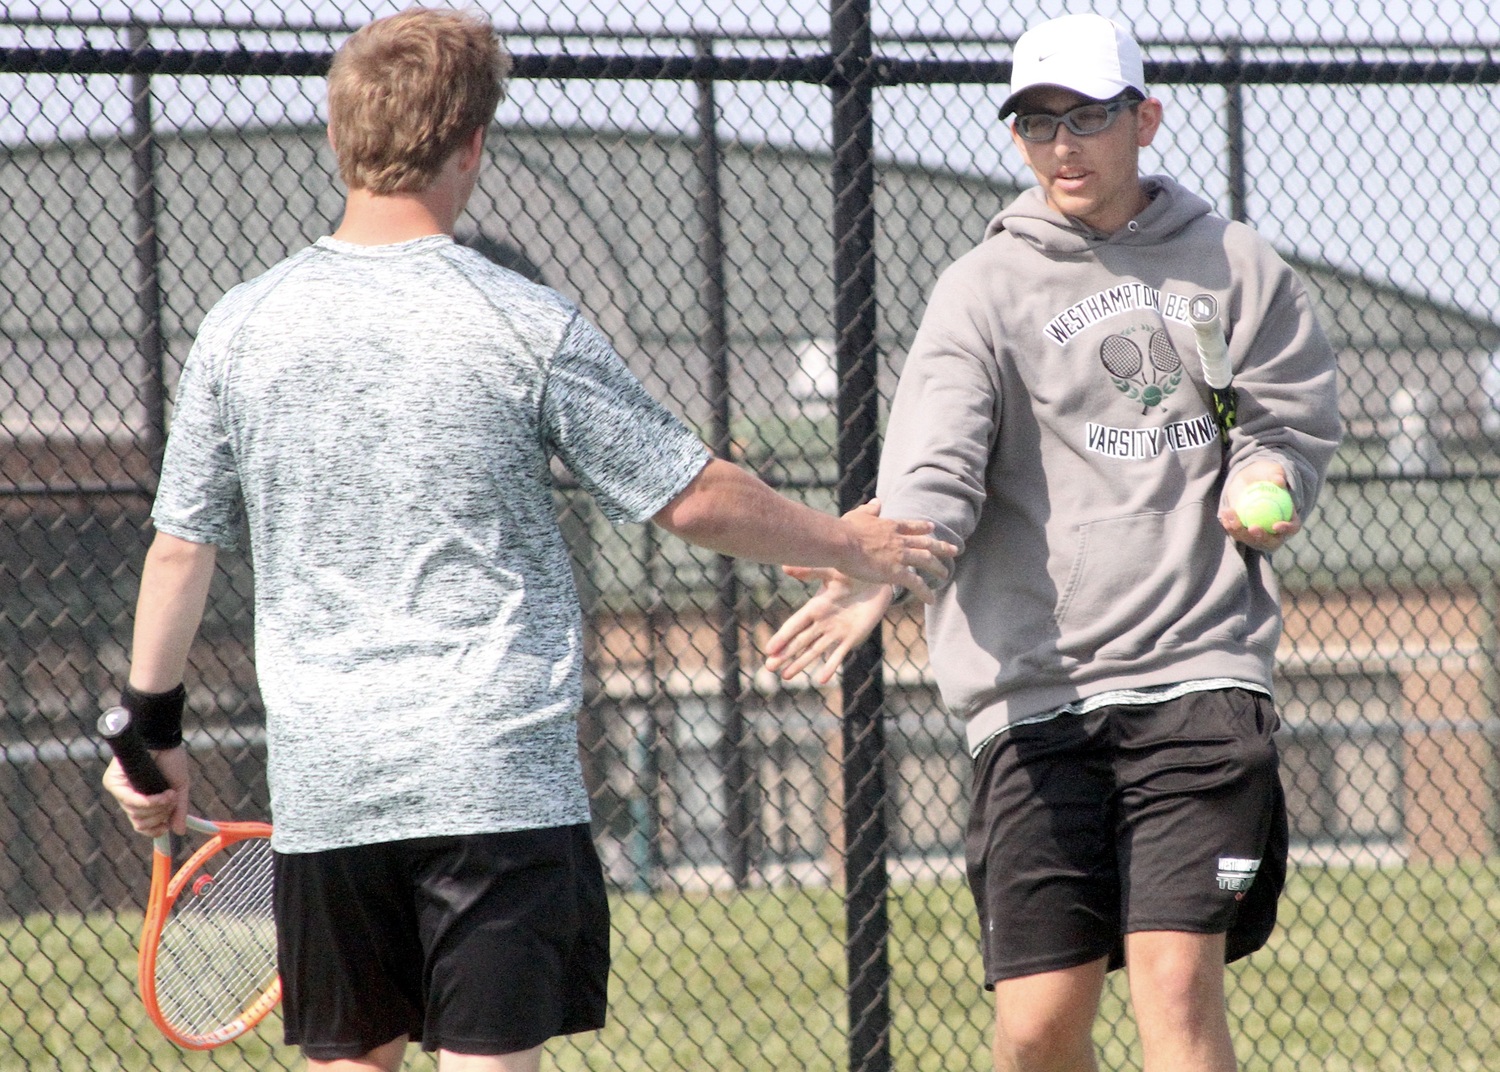 Sophomore Giancarlo Volpe celebrates a point with doubles teammate Bobby Stabile. DESIRÉE KEEGAN